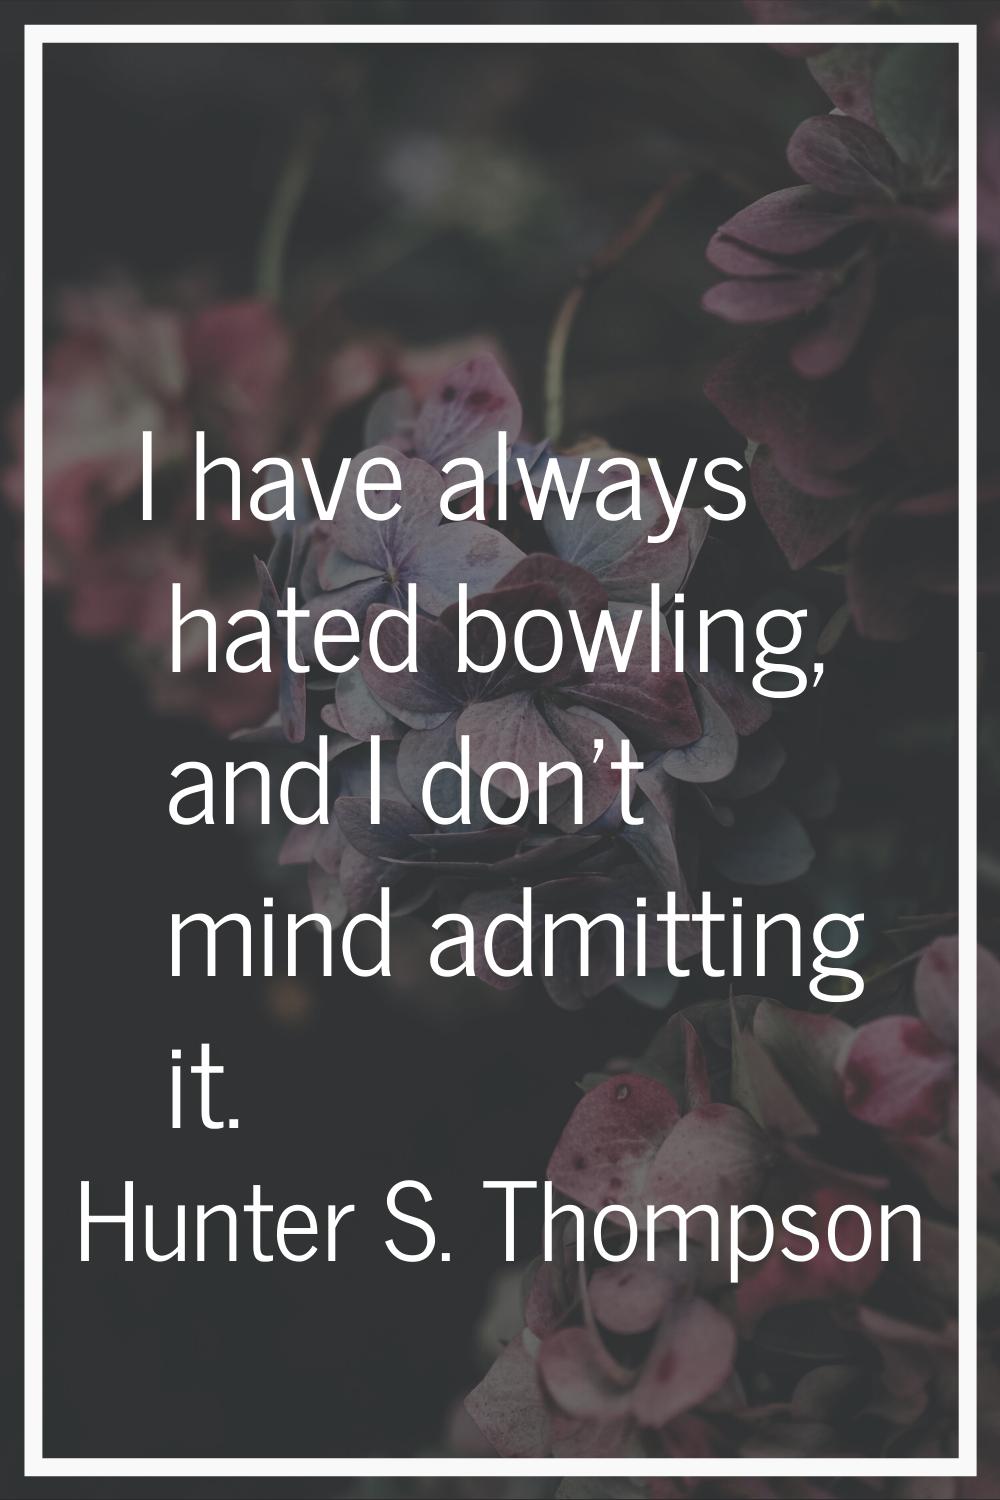 I have always hated bowling, and I don't mind admitting it.